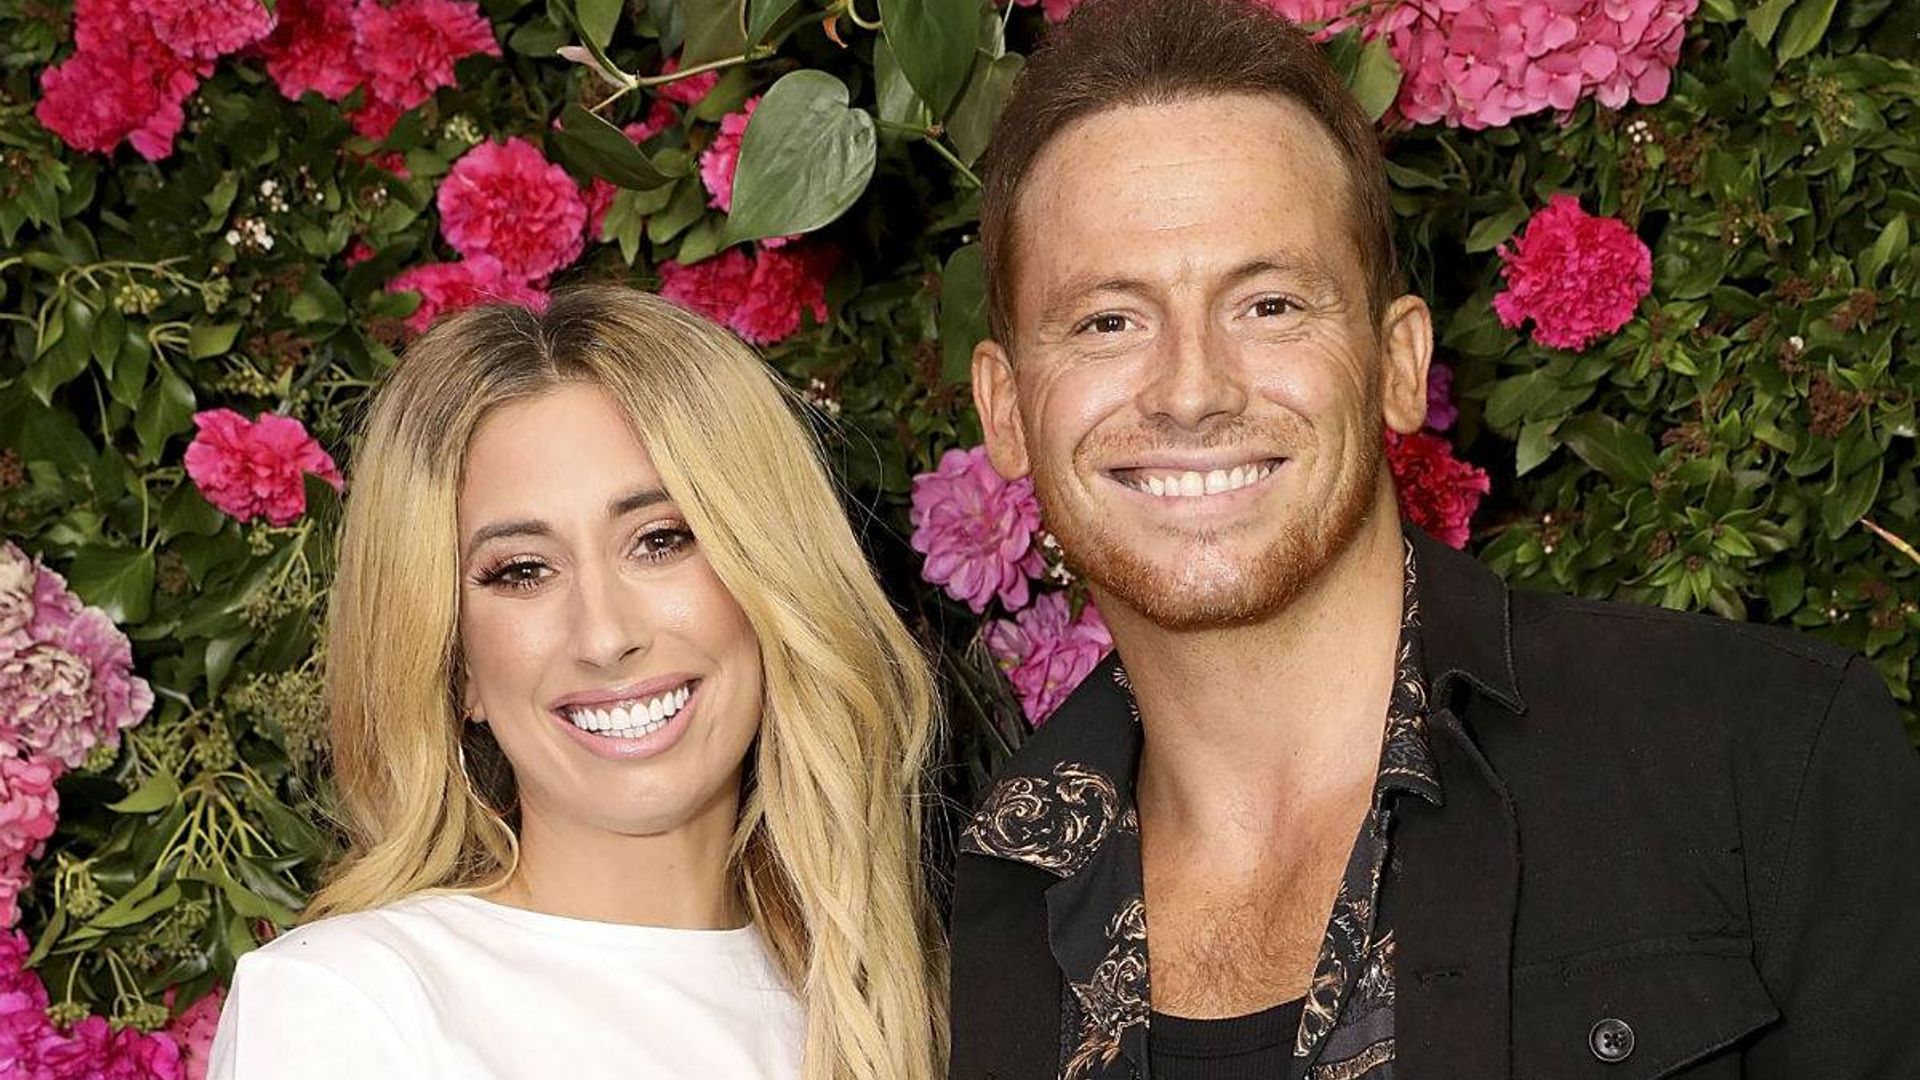 stacey solomon joe swash engagement party brother